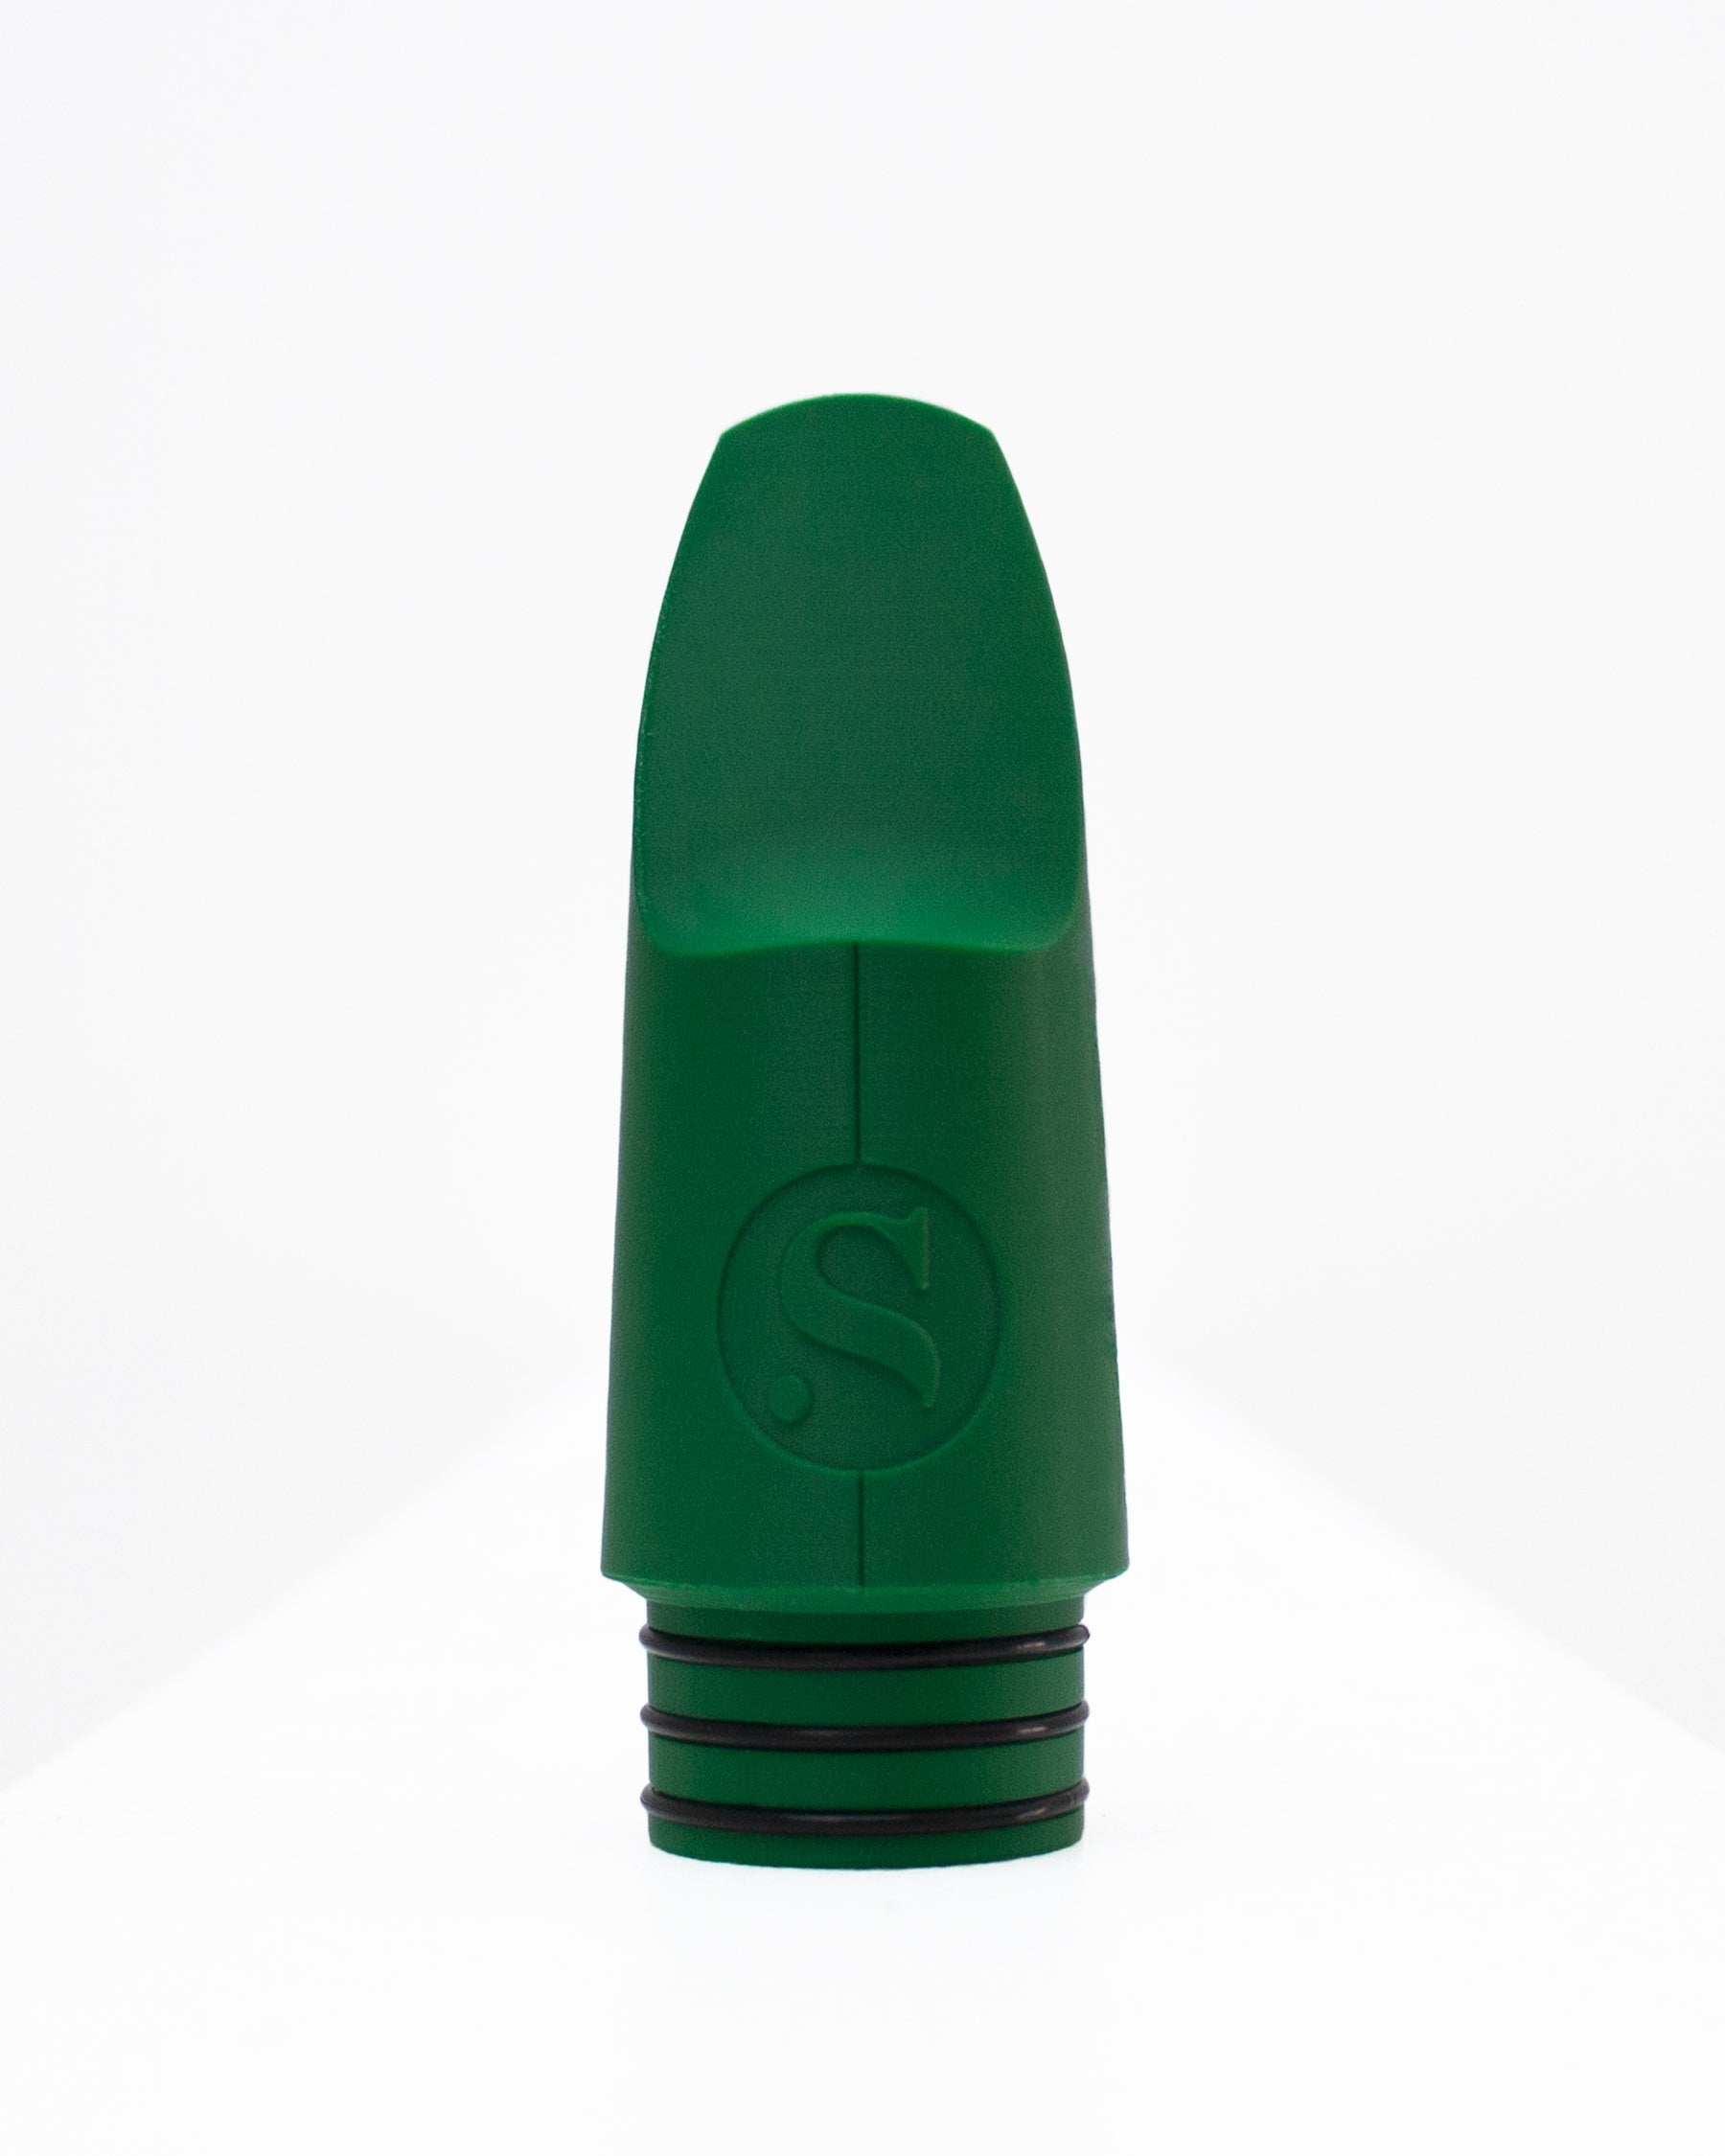 Bass Signature Clarinet mouthpiece - Shabaka Hutchings by Syos - Forest Green